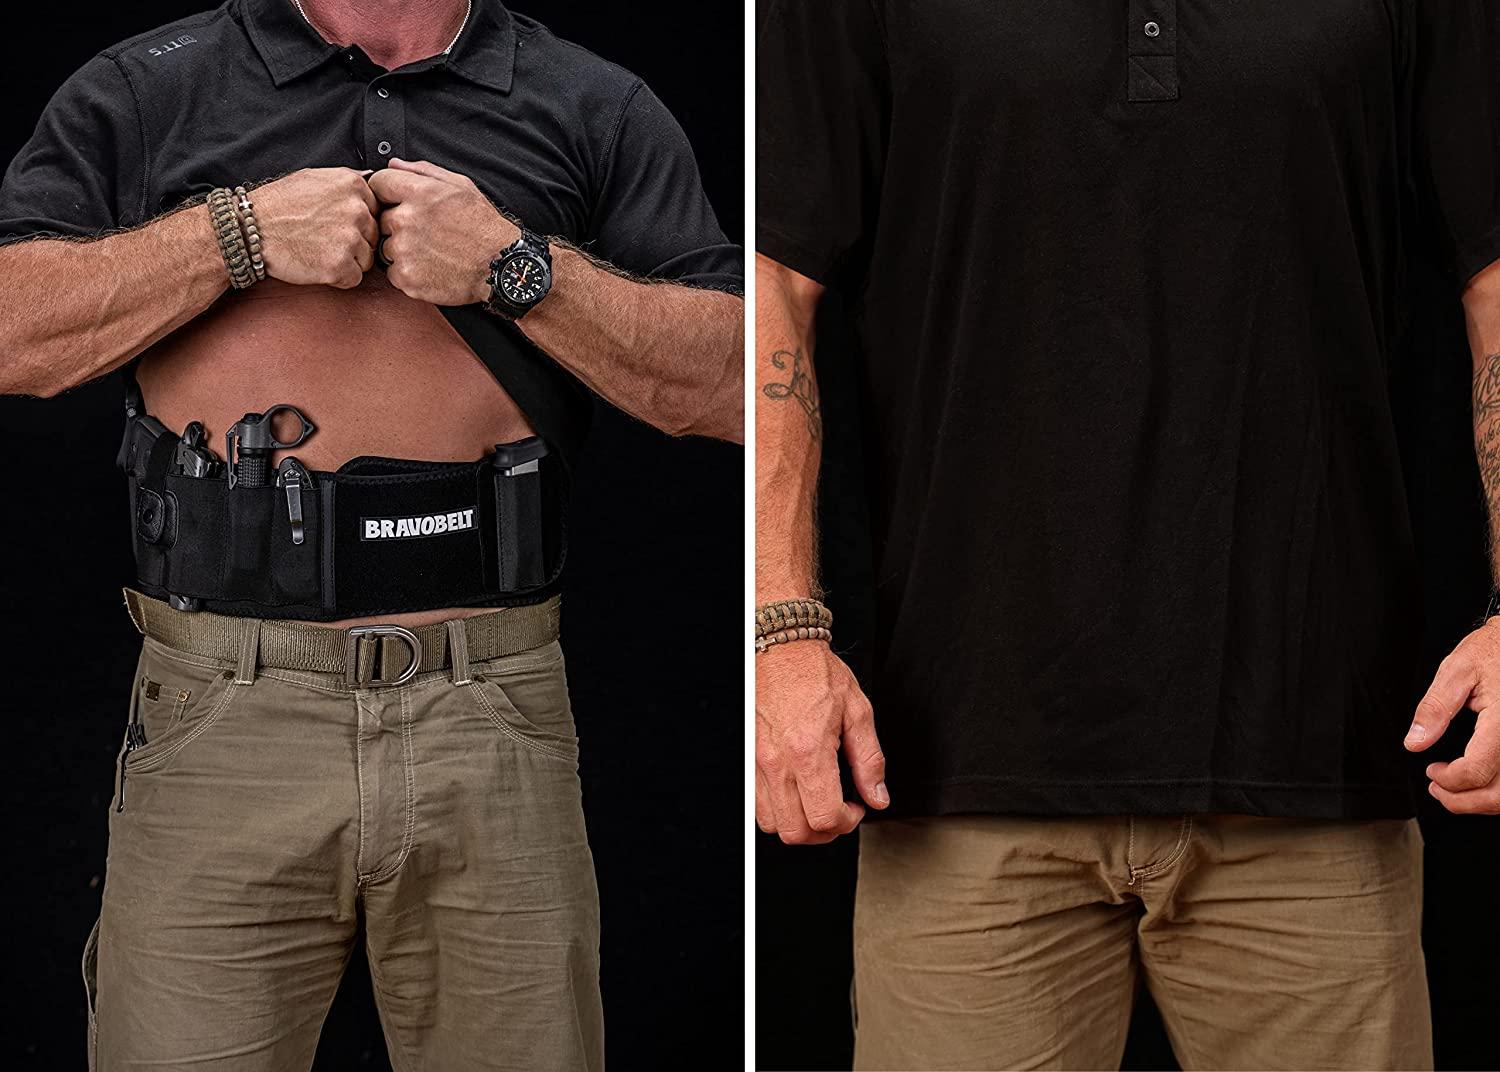 7 Best Belly Band Holsters for Concealed Carry & Working Out - Pew Pew  Tactical